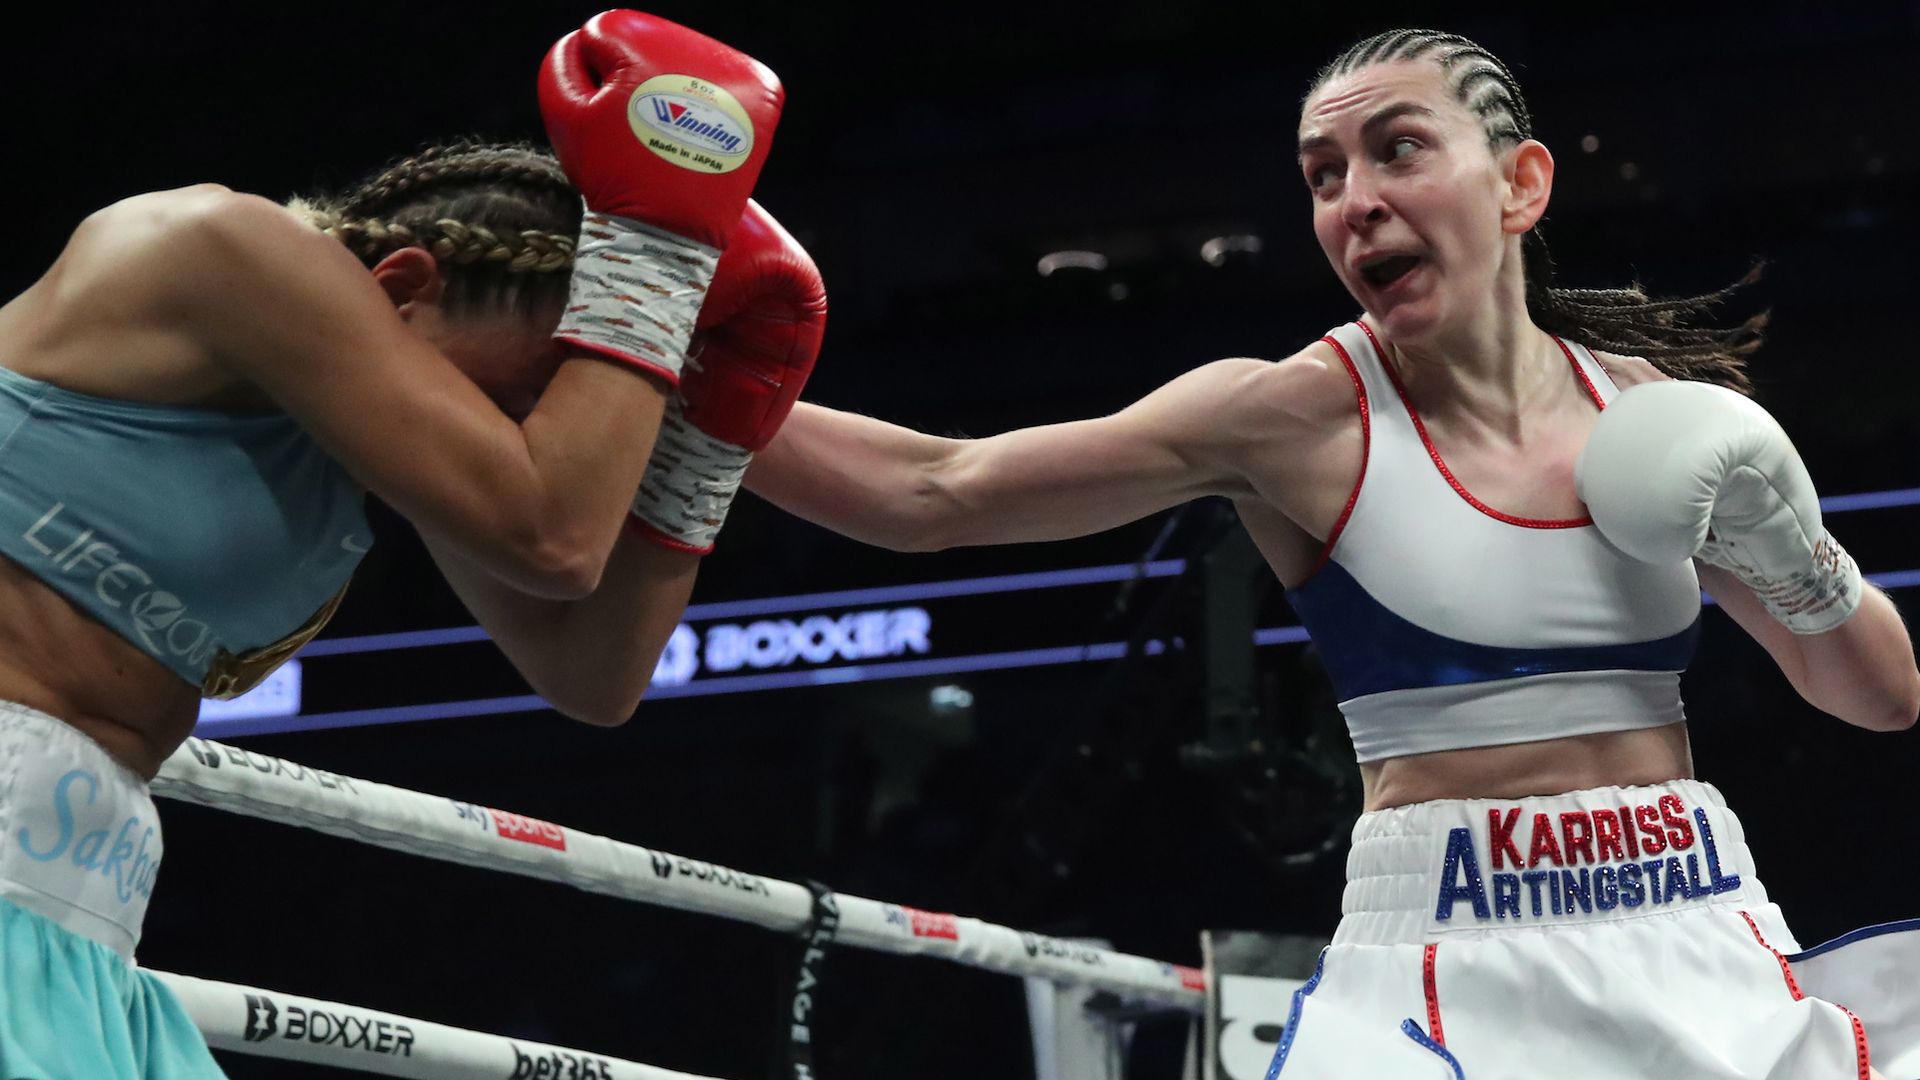 LISTEN: Women’s British title fights to come ‘soon’